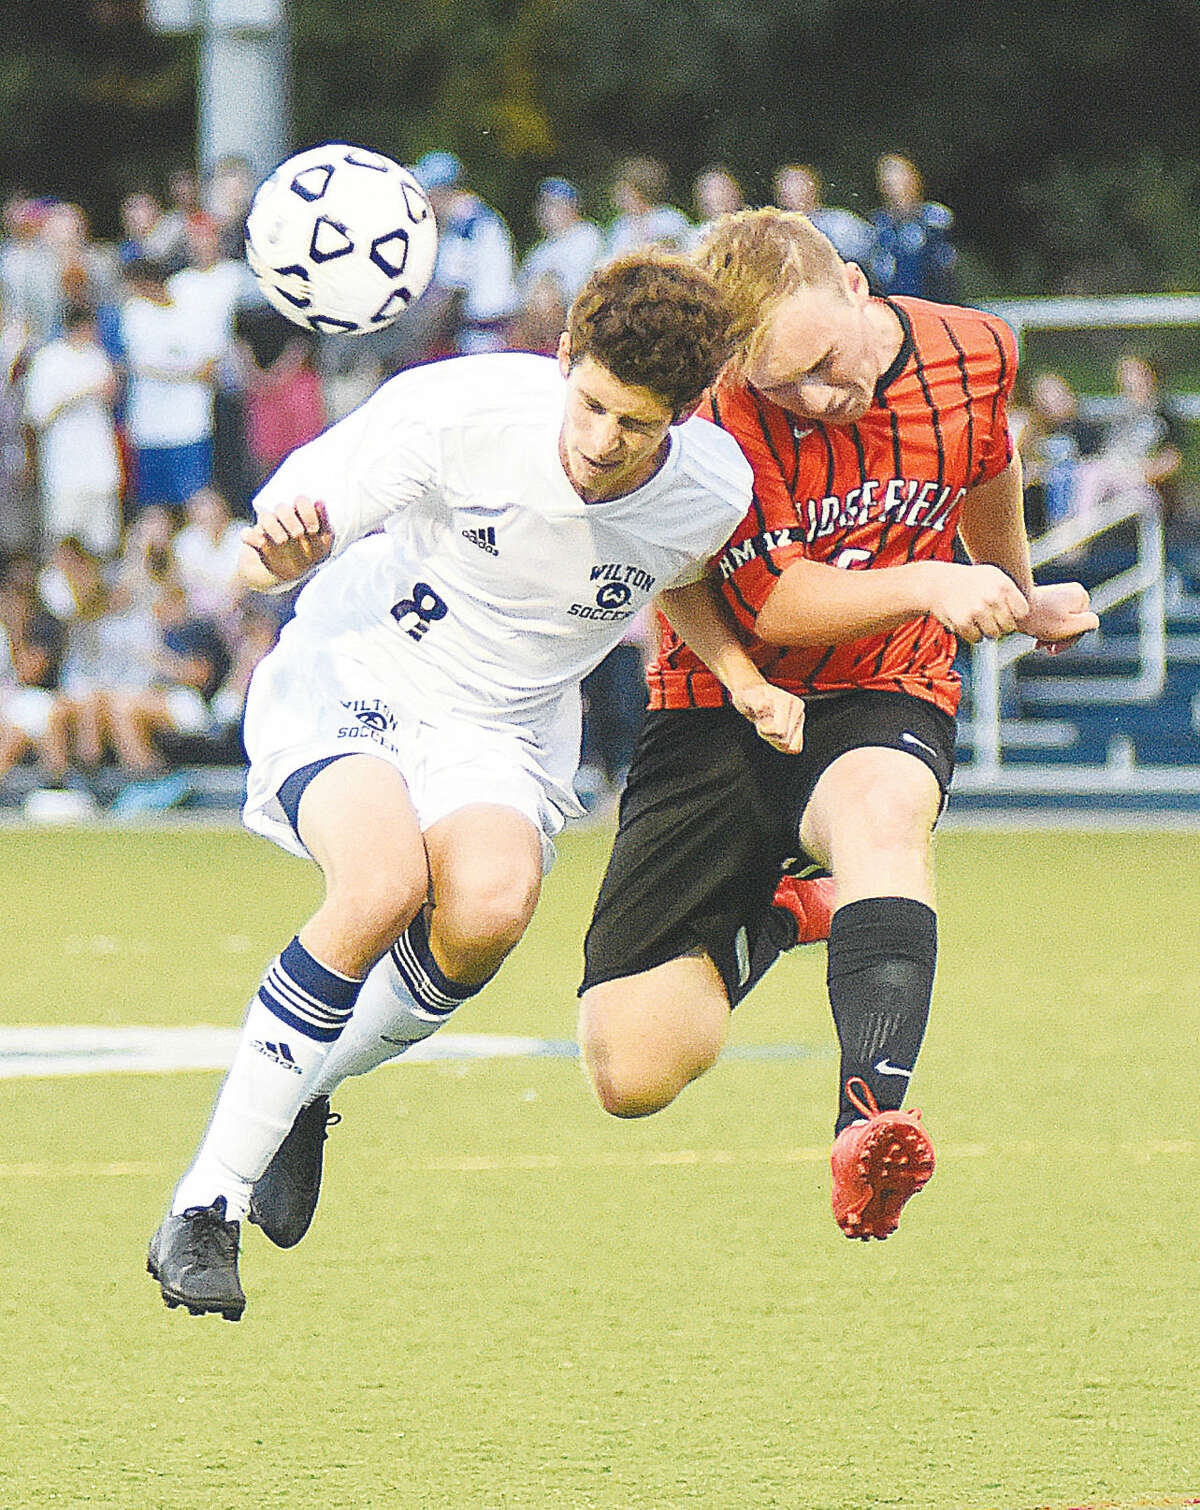 Hour photo/John Nash - Jordan Lord, left, heads the ball against Ridgefield Tigers player Edwin Hassenstein during Monday's FCIAC boys soccer game in Wilton.